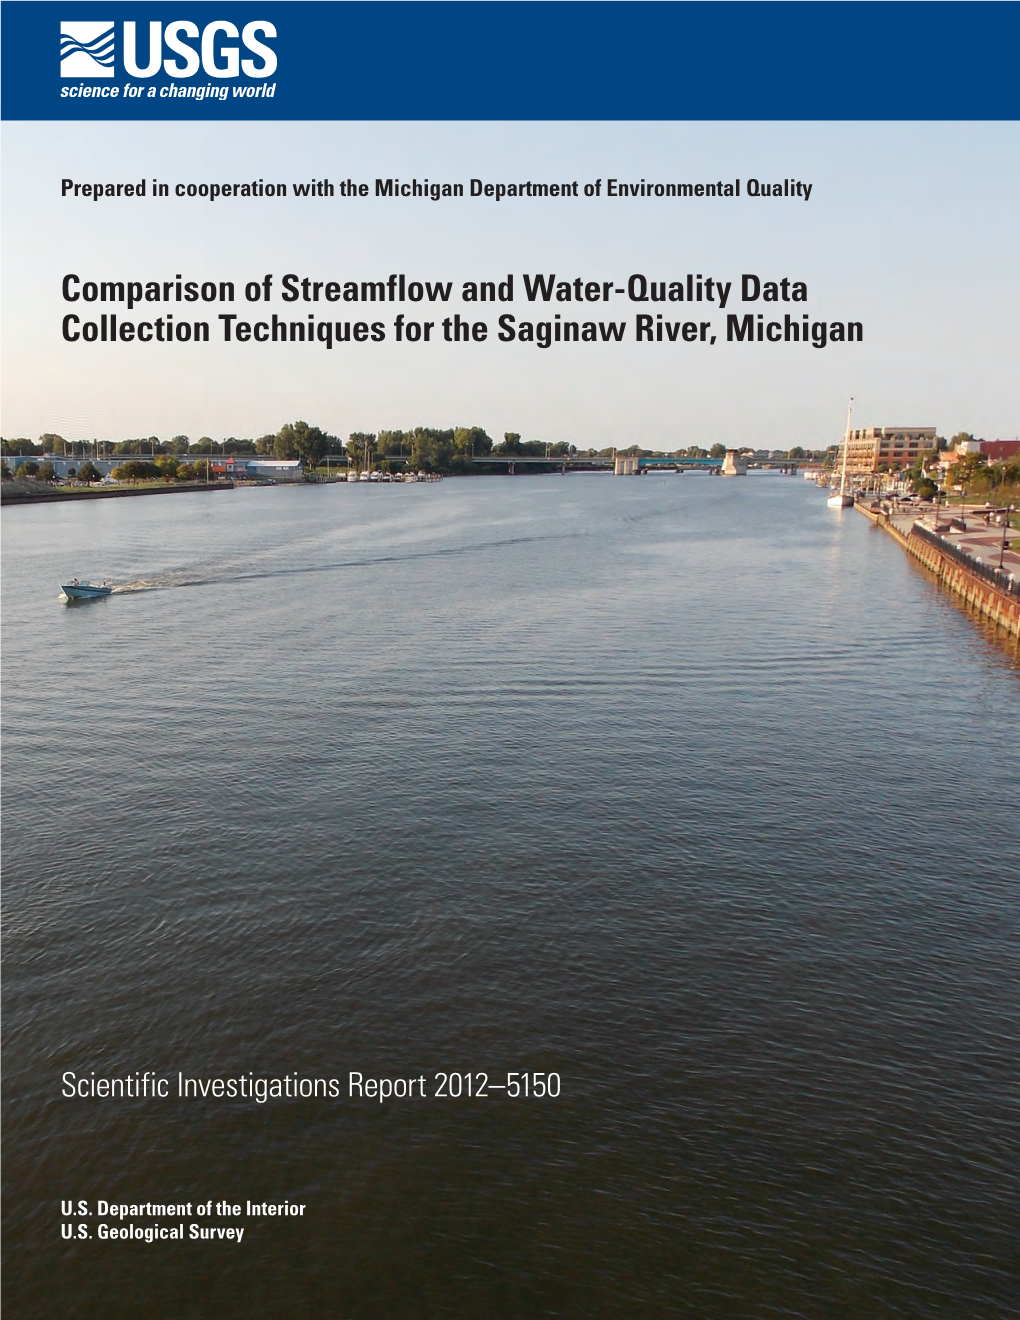 Comparison of Streamflow and Water-Quality Data Collection Techniques for the Saginaw River, Michigan